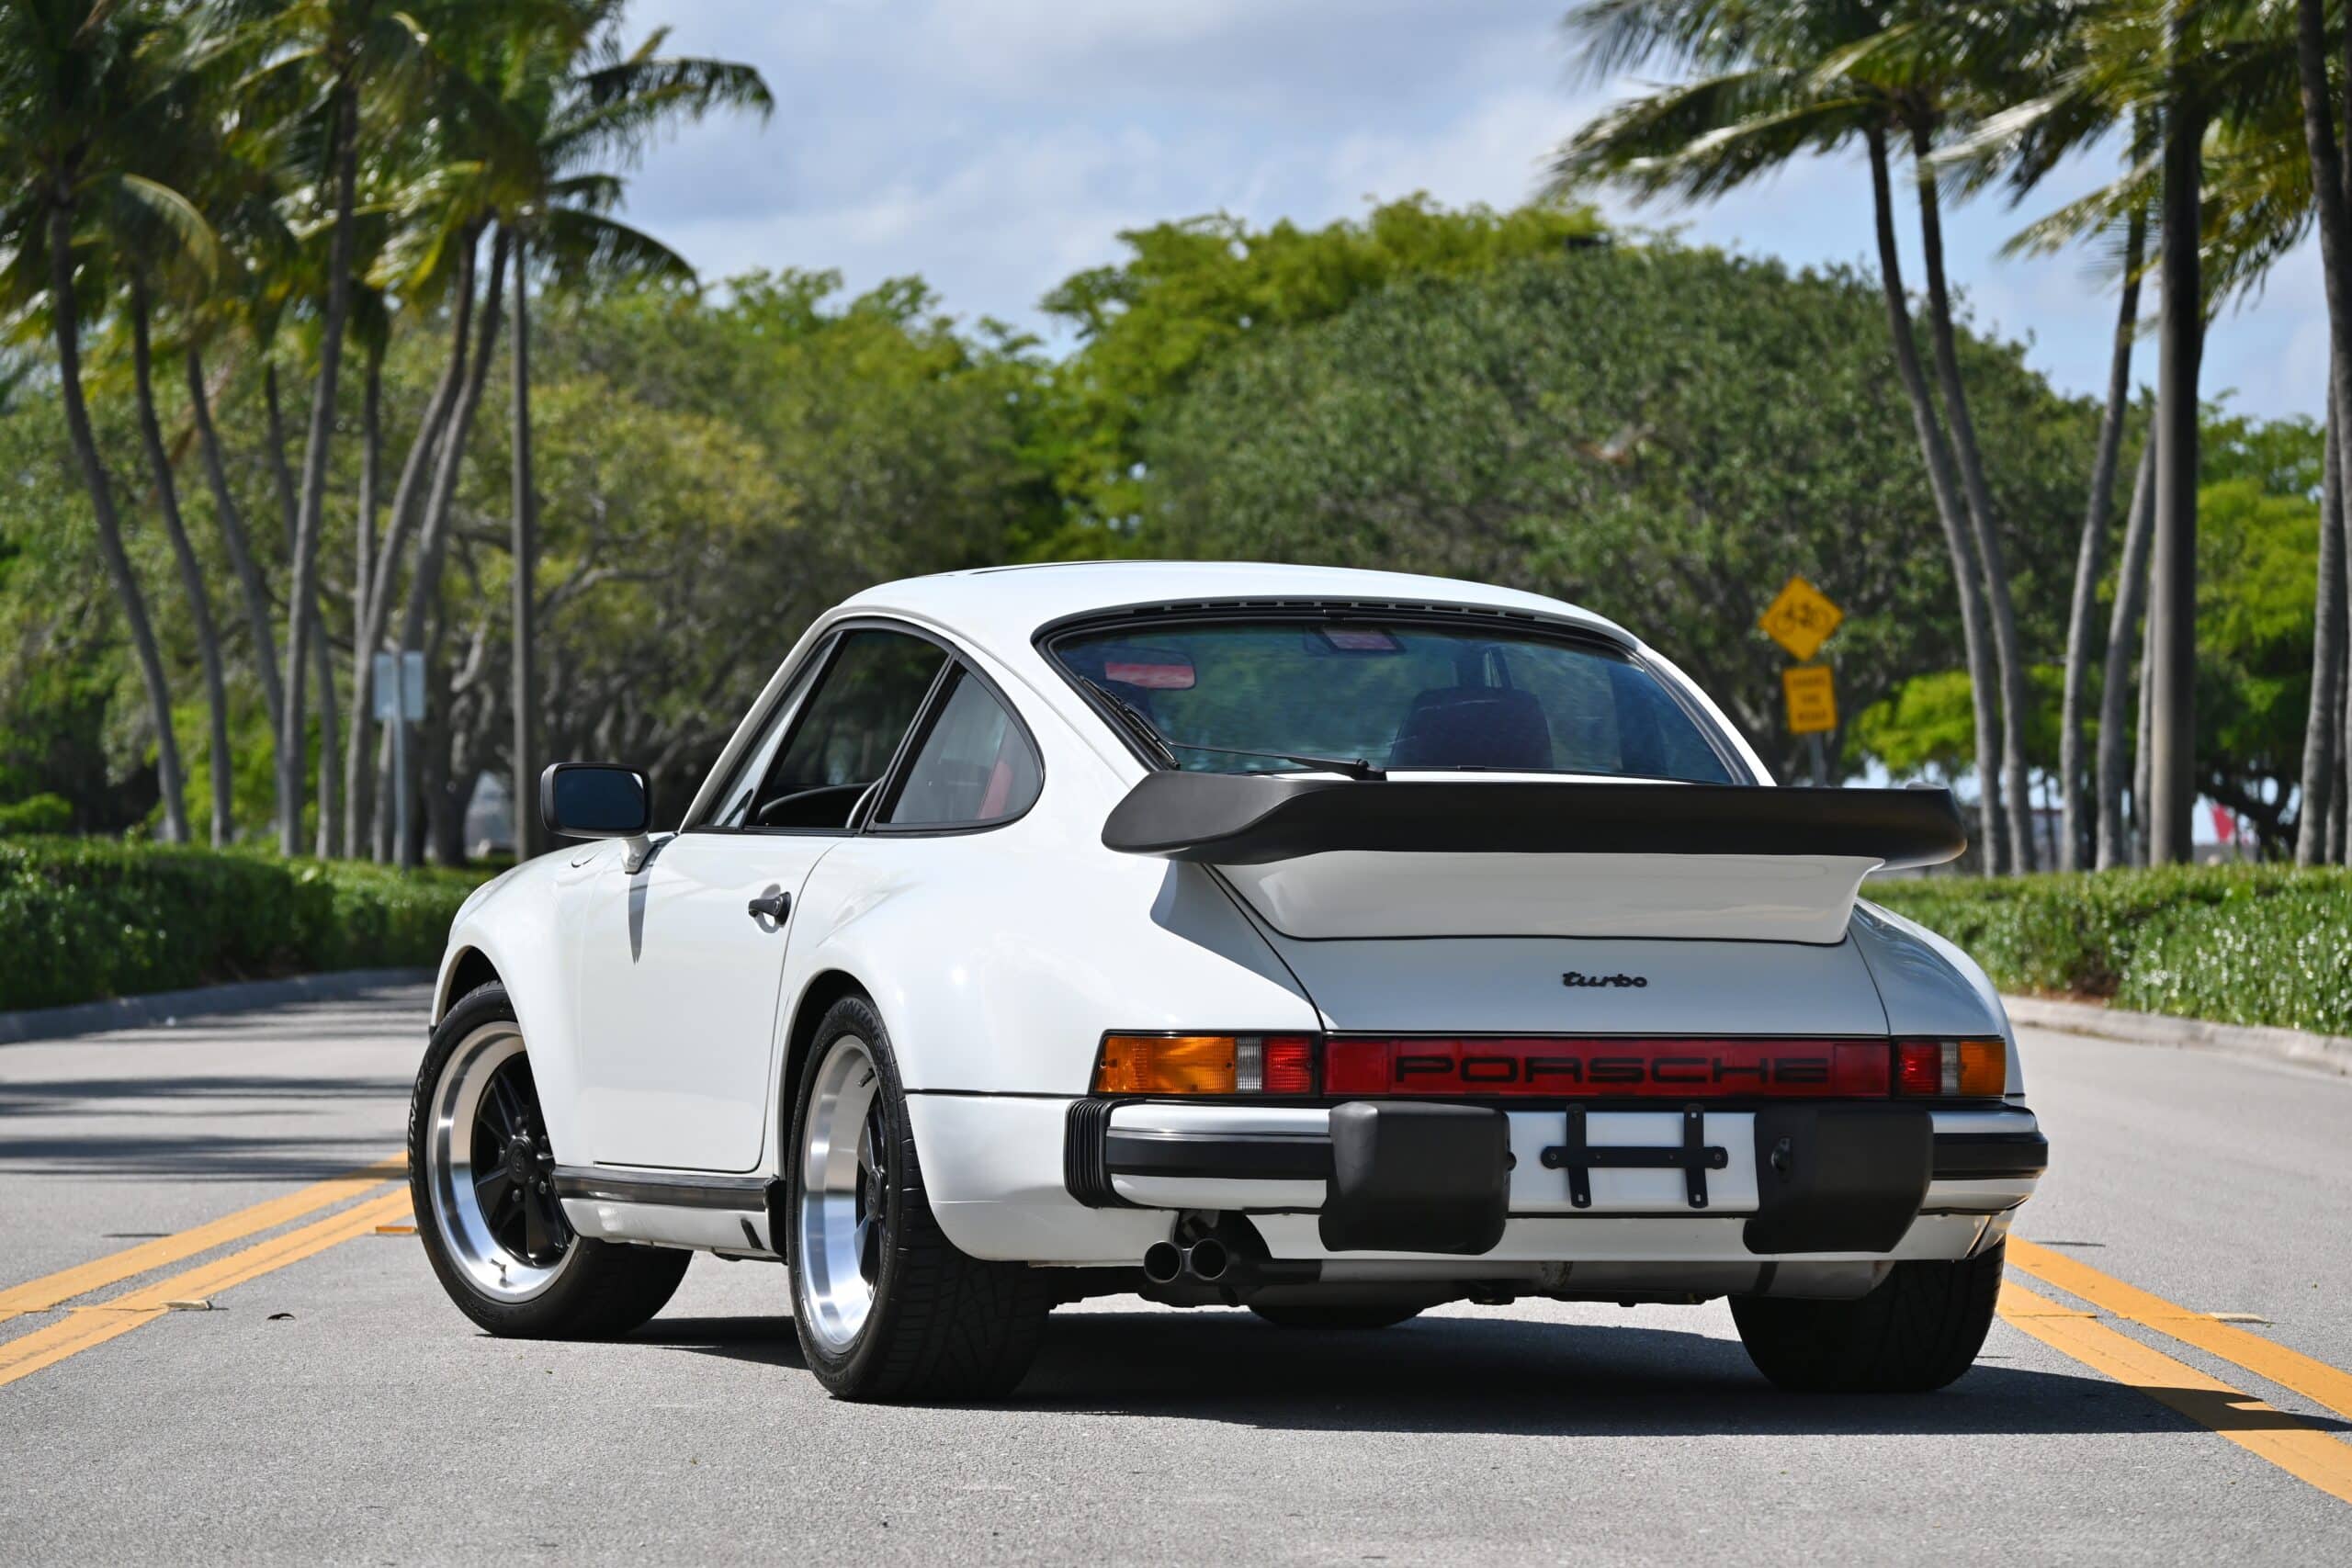 1986 Porsche 911 930 Turbo Showroom Condition-Only 40k Miles-Rare Color Combo-Matching numbers – Unrestored